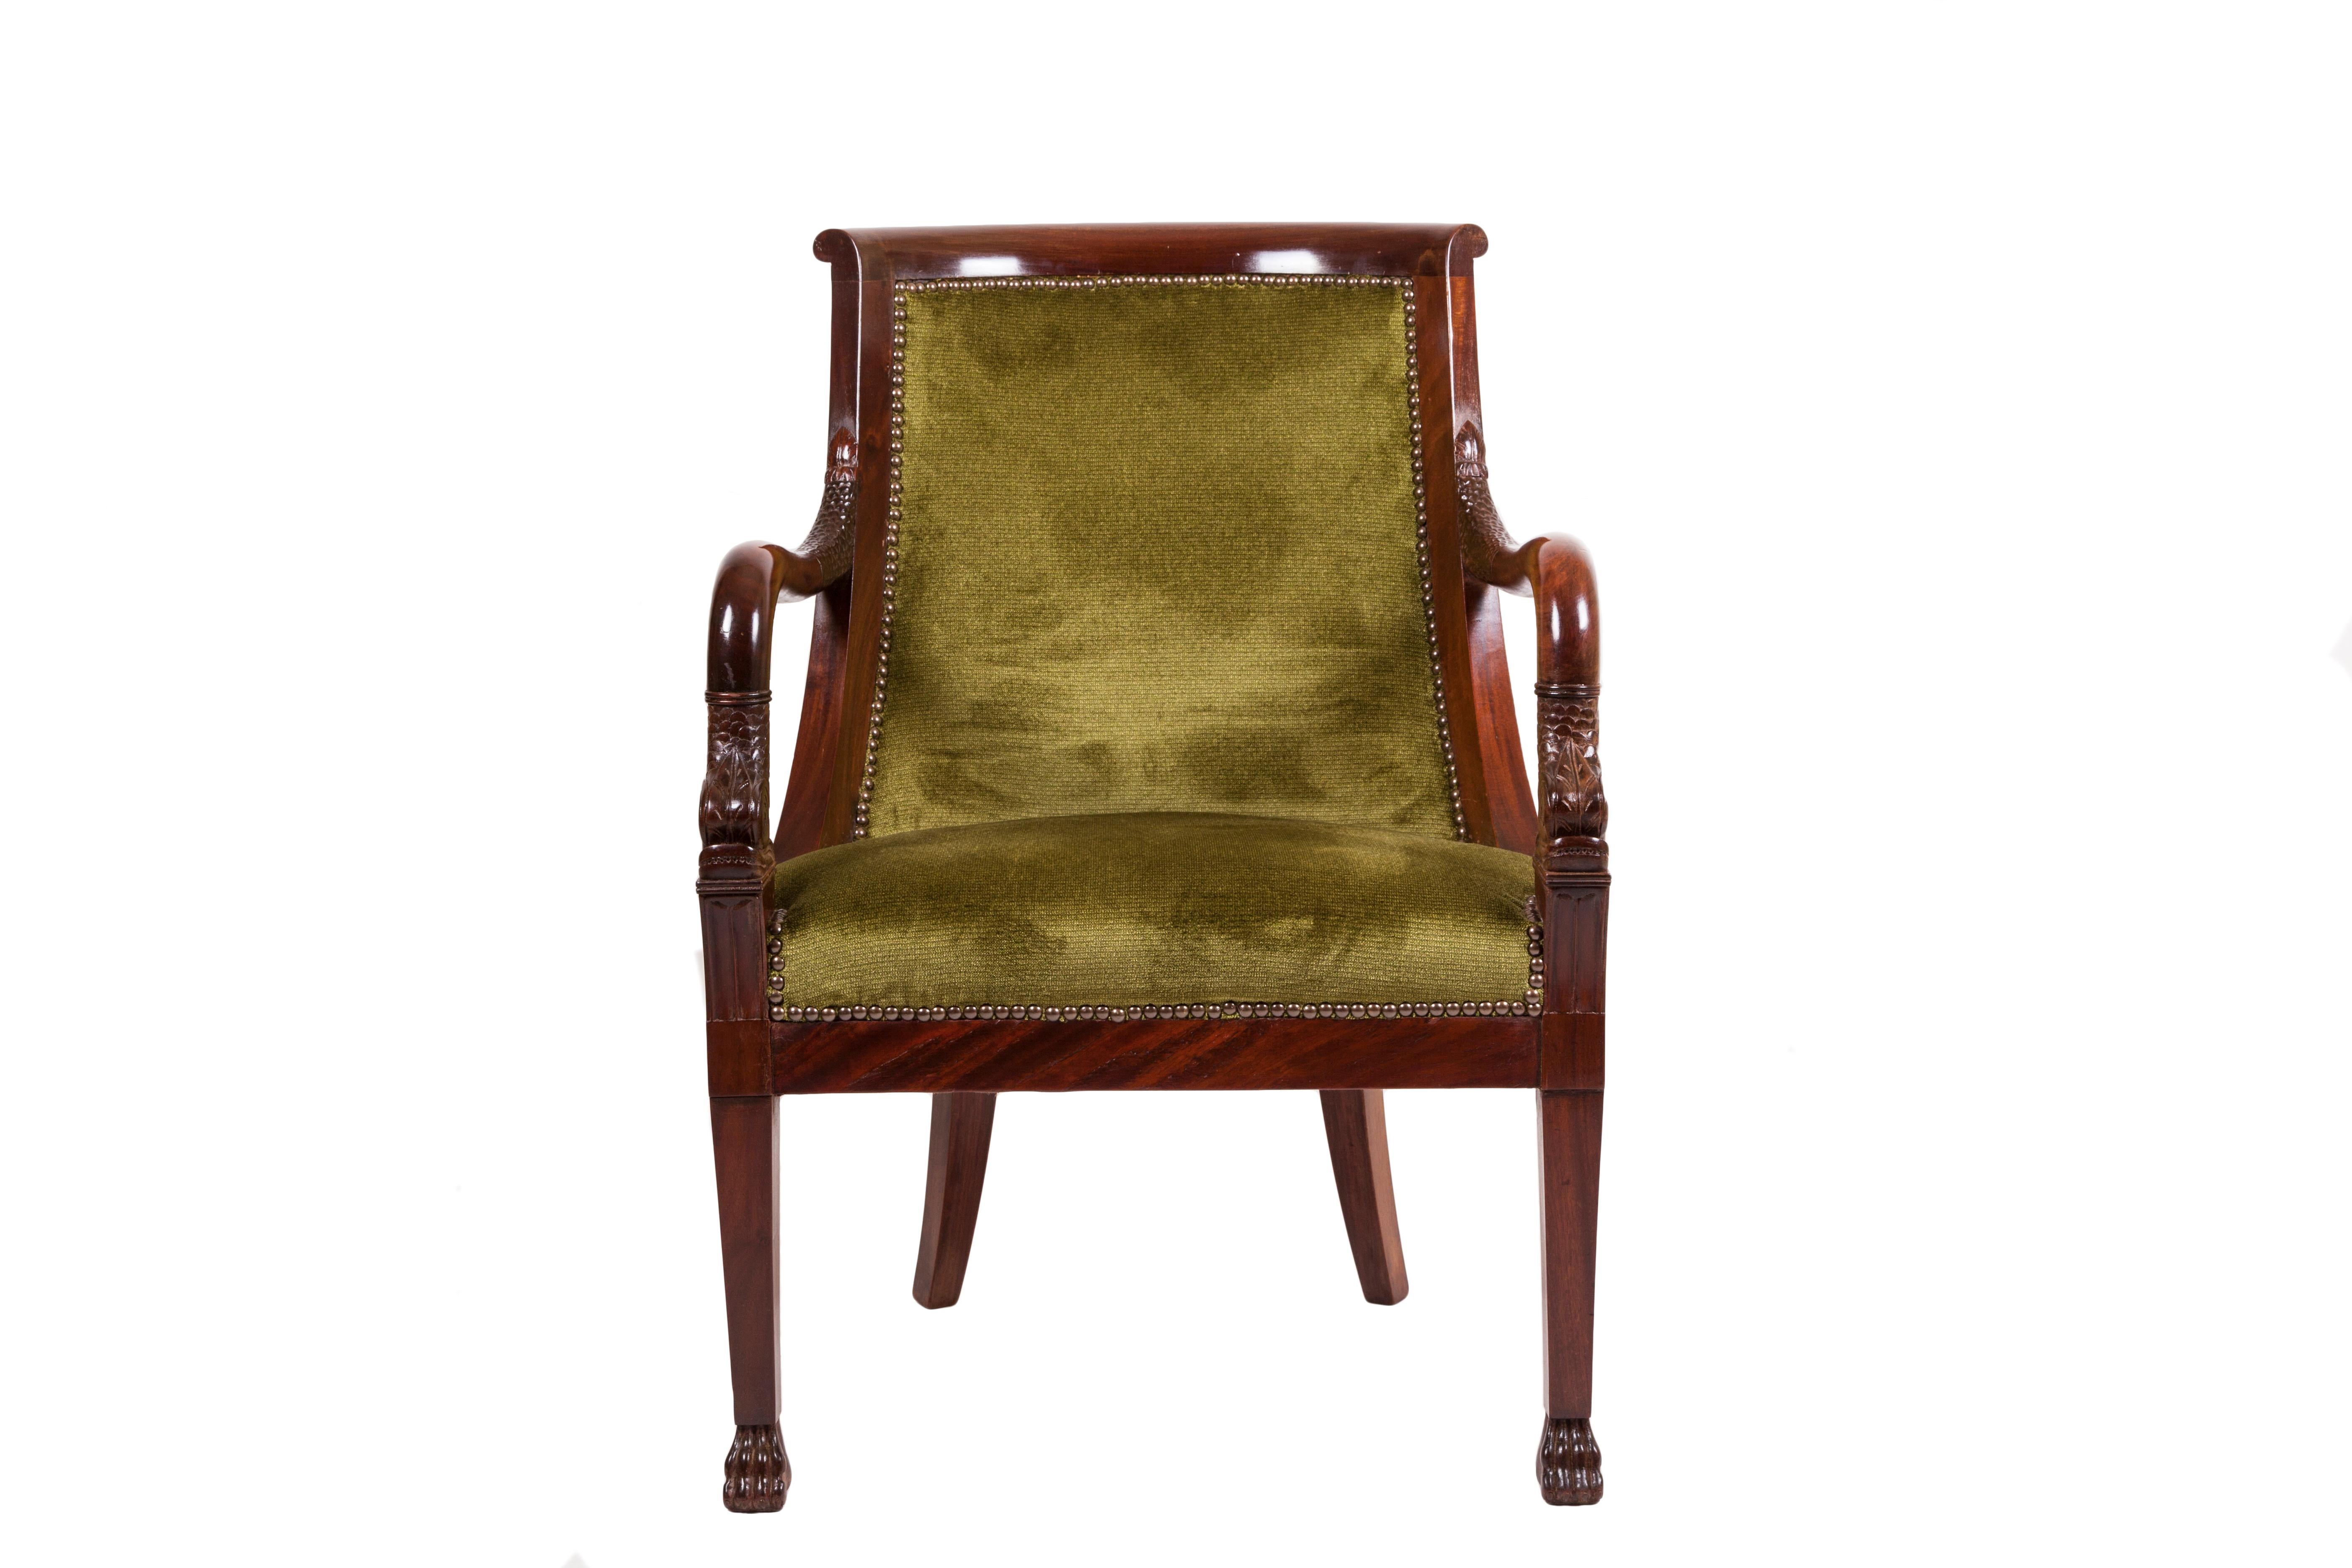 A pair of mahogany armchairs, in Empire style, with new upholstery in green velvet.
France, circa 1930.
Restored and finished in shellac.